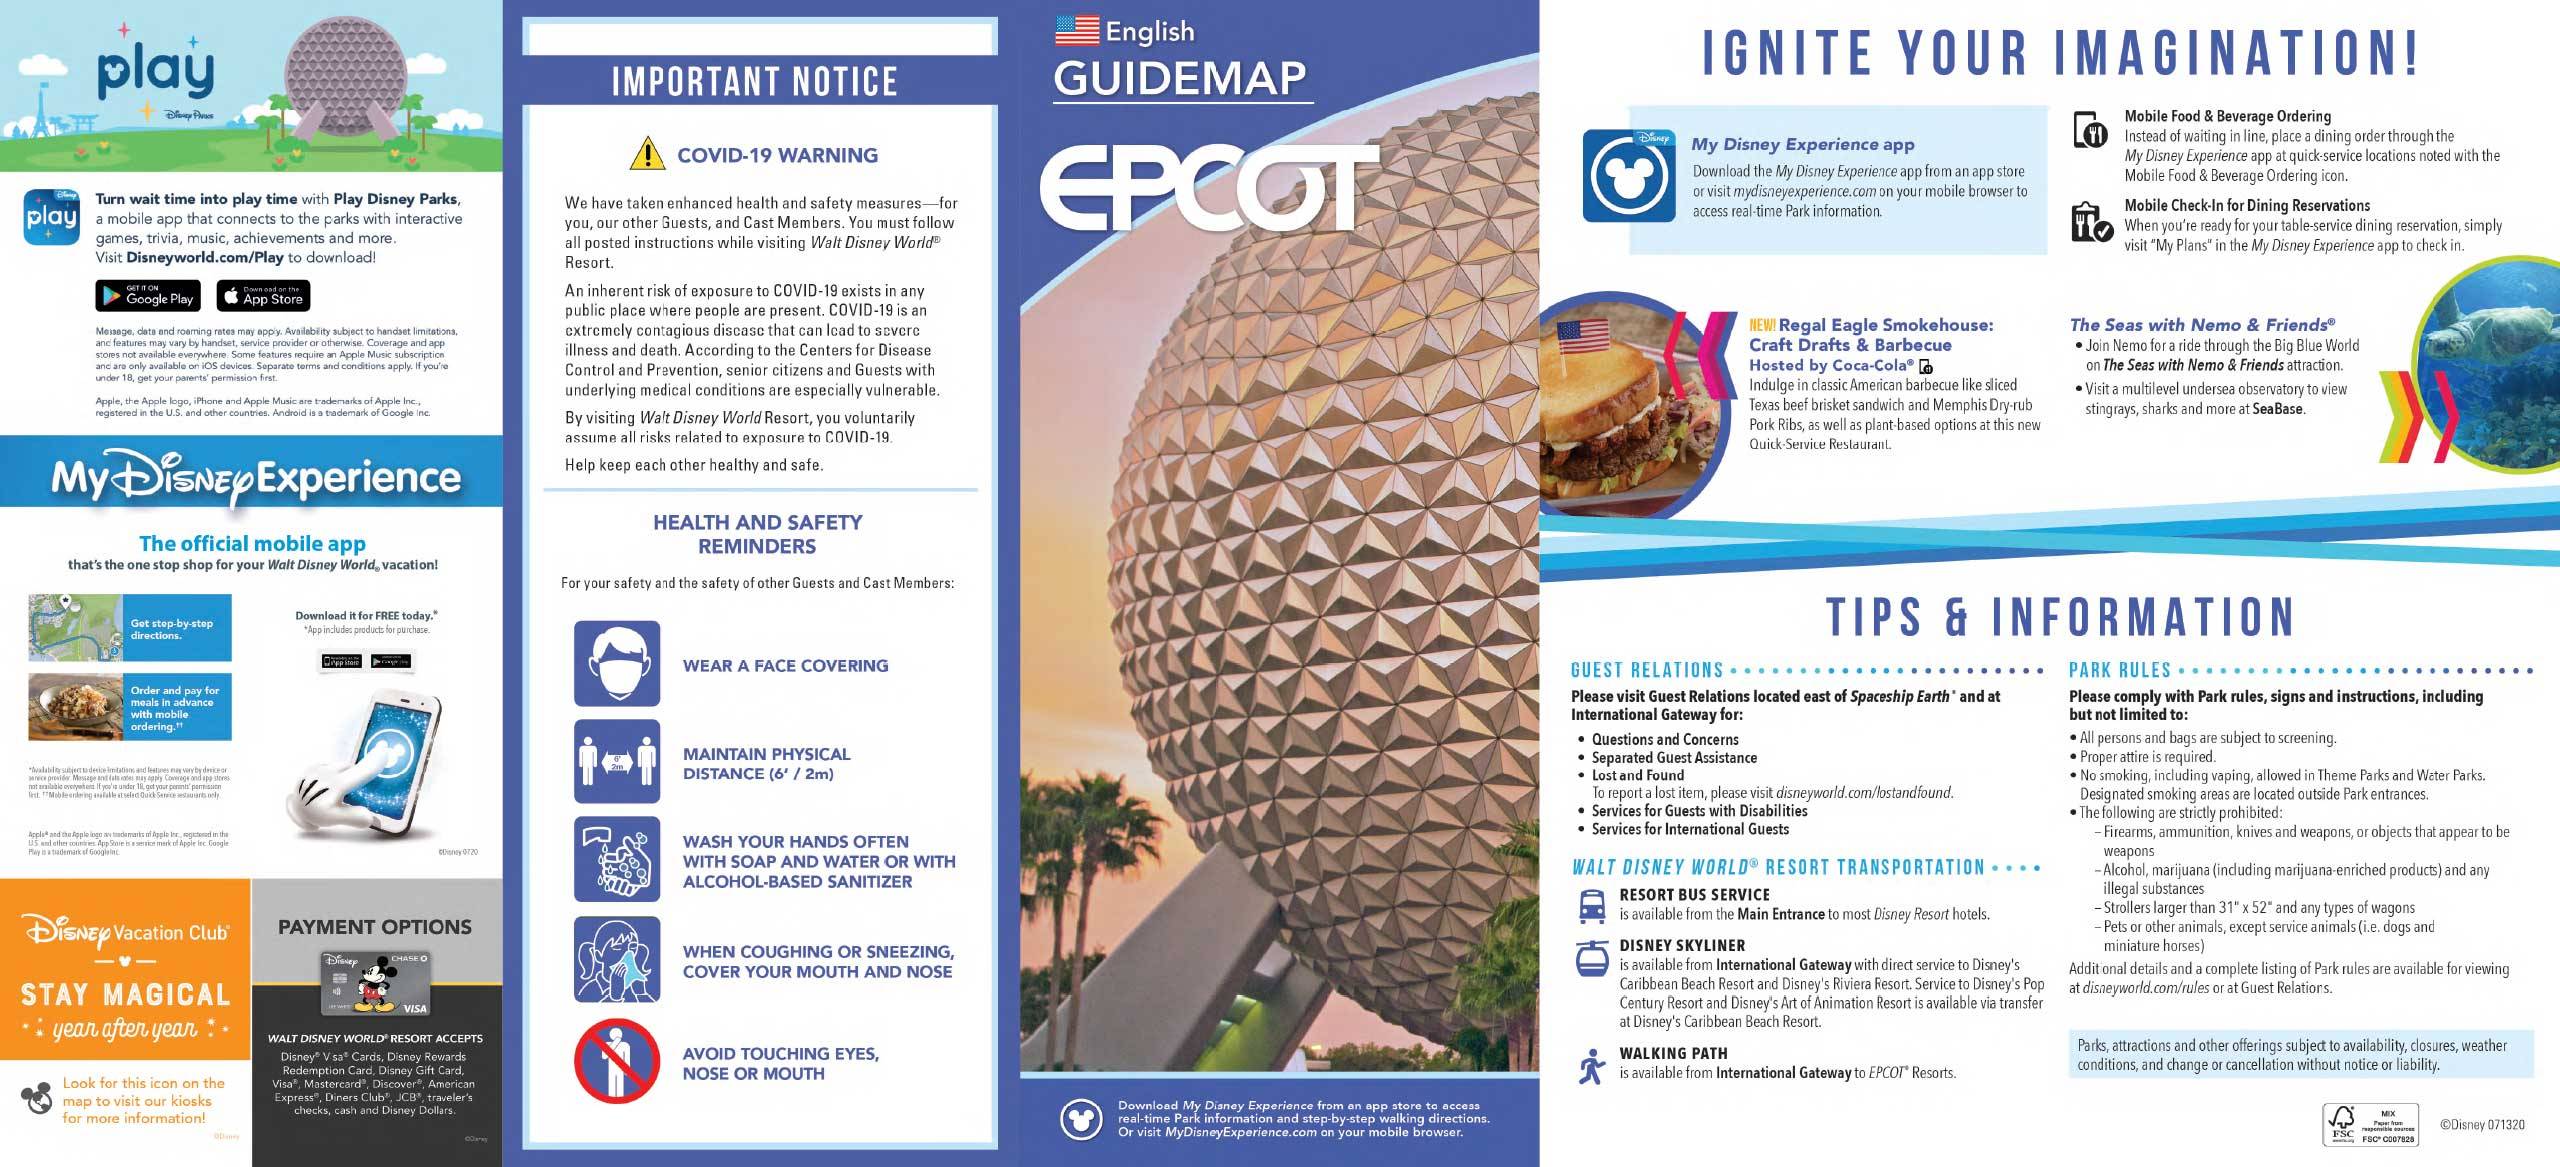 EPCOT Guide Map July 2020 - Front